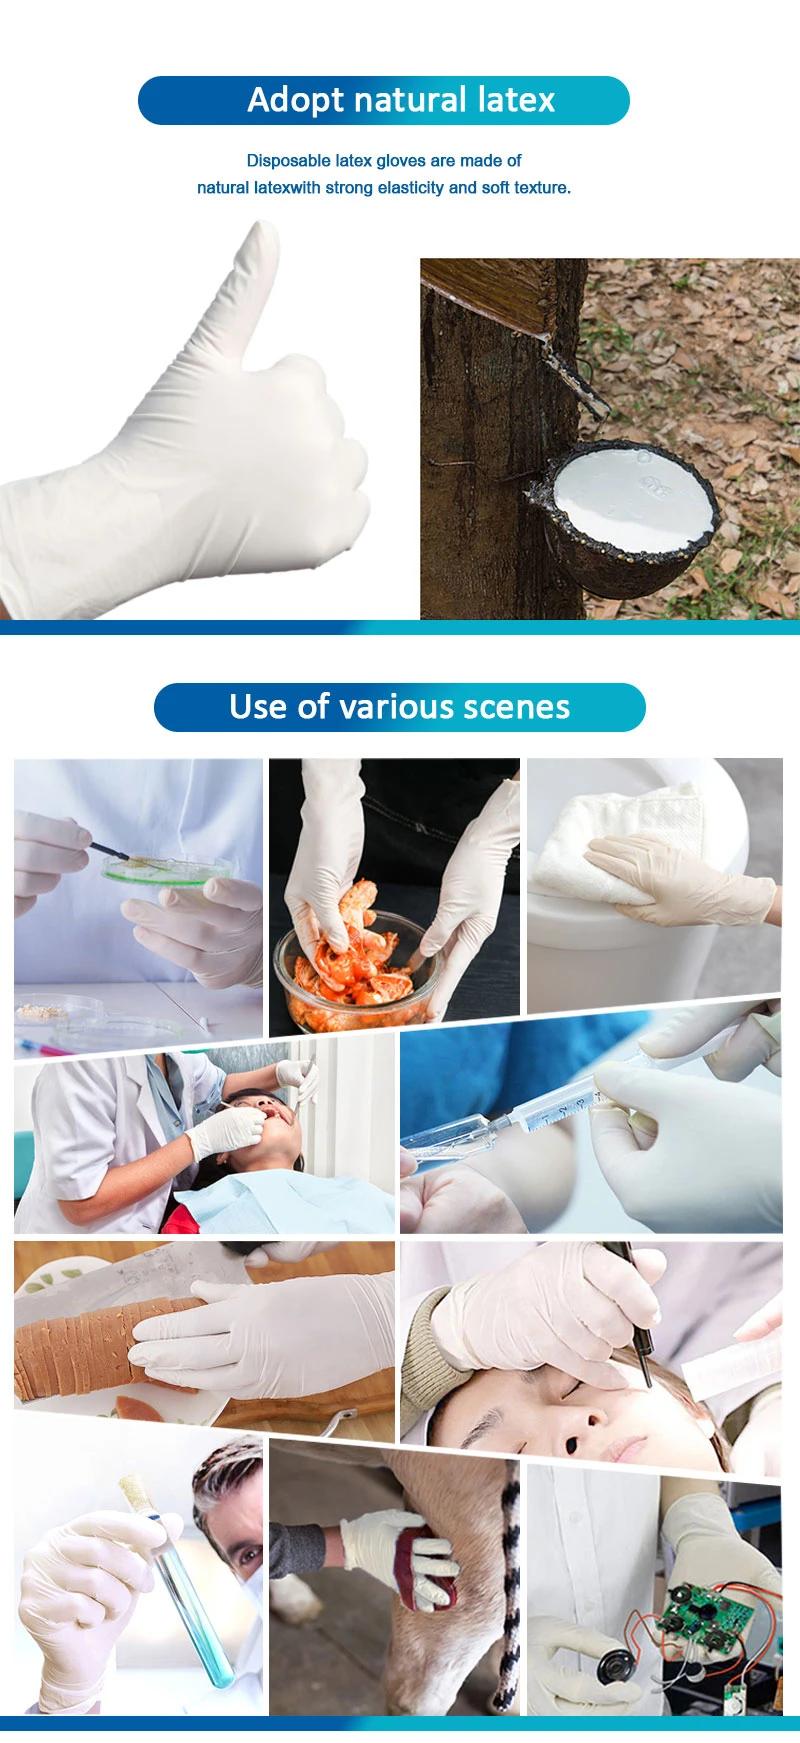 Disposable Work Cotton Cleaning Industrial Protective Examination Powder Free PVC Rubber Safety Latex Nitrile Vinyl Hand Gloves